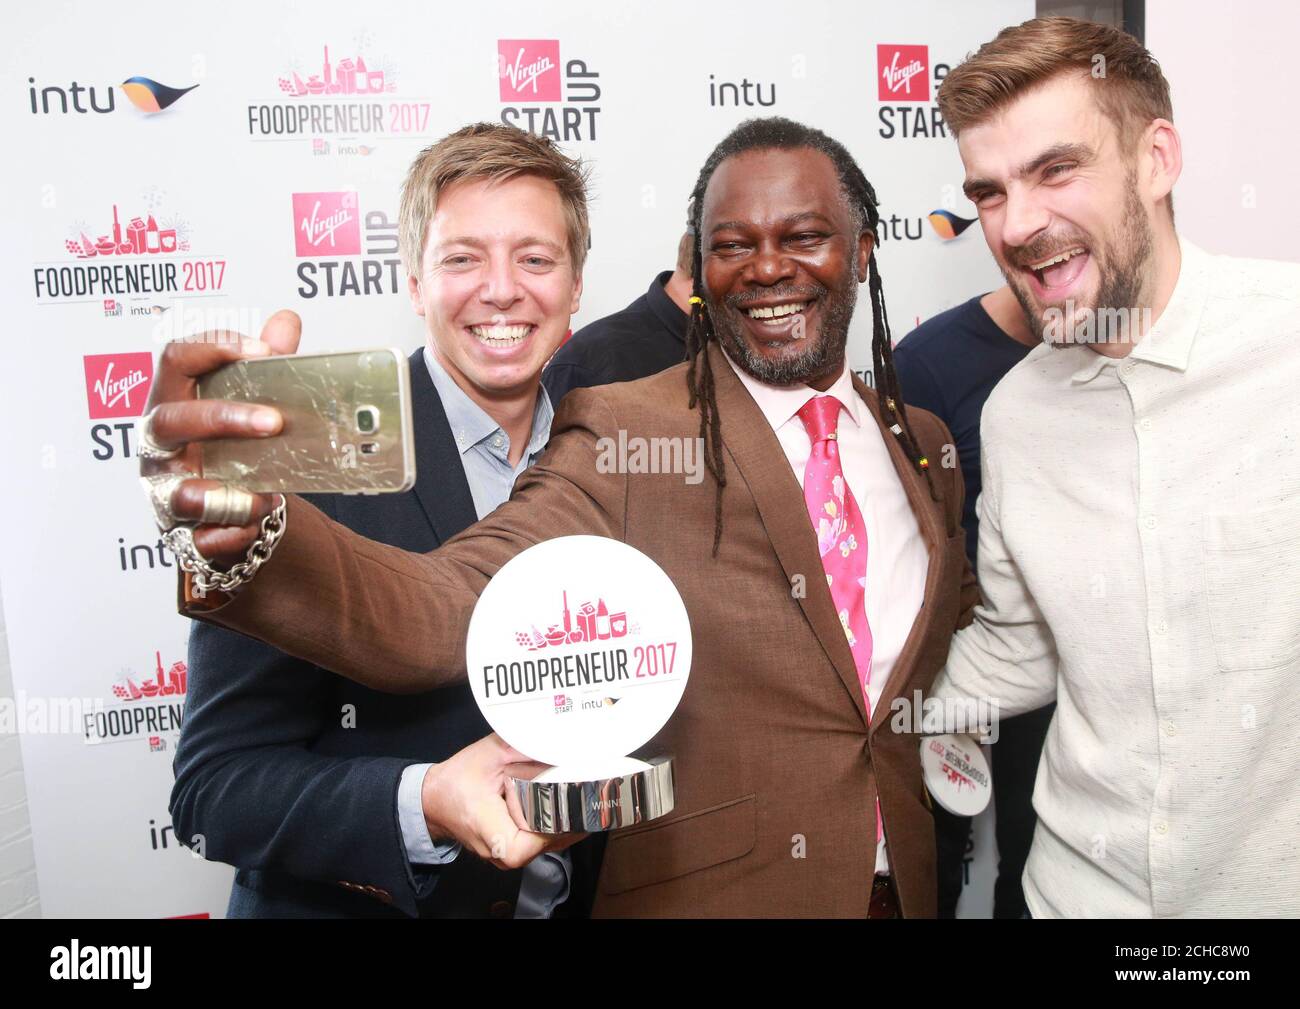 EDITORIAL USE ONLY Judge Levi Roots, founder of Reggae Reggae Sauce (centre) with Nick Coleman and Andy Allen, from Snaffling Pig, who have been announced as the winner of the intu and Virgin StartUp's Foodpreneur competition at Virgin Startup HQ in London, walking away with six week's free retail space at intu Lakeside to run their new business.  Stock Photo